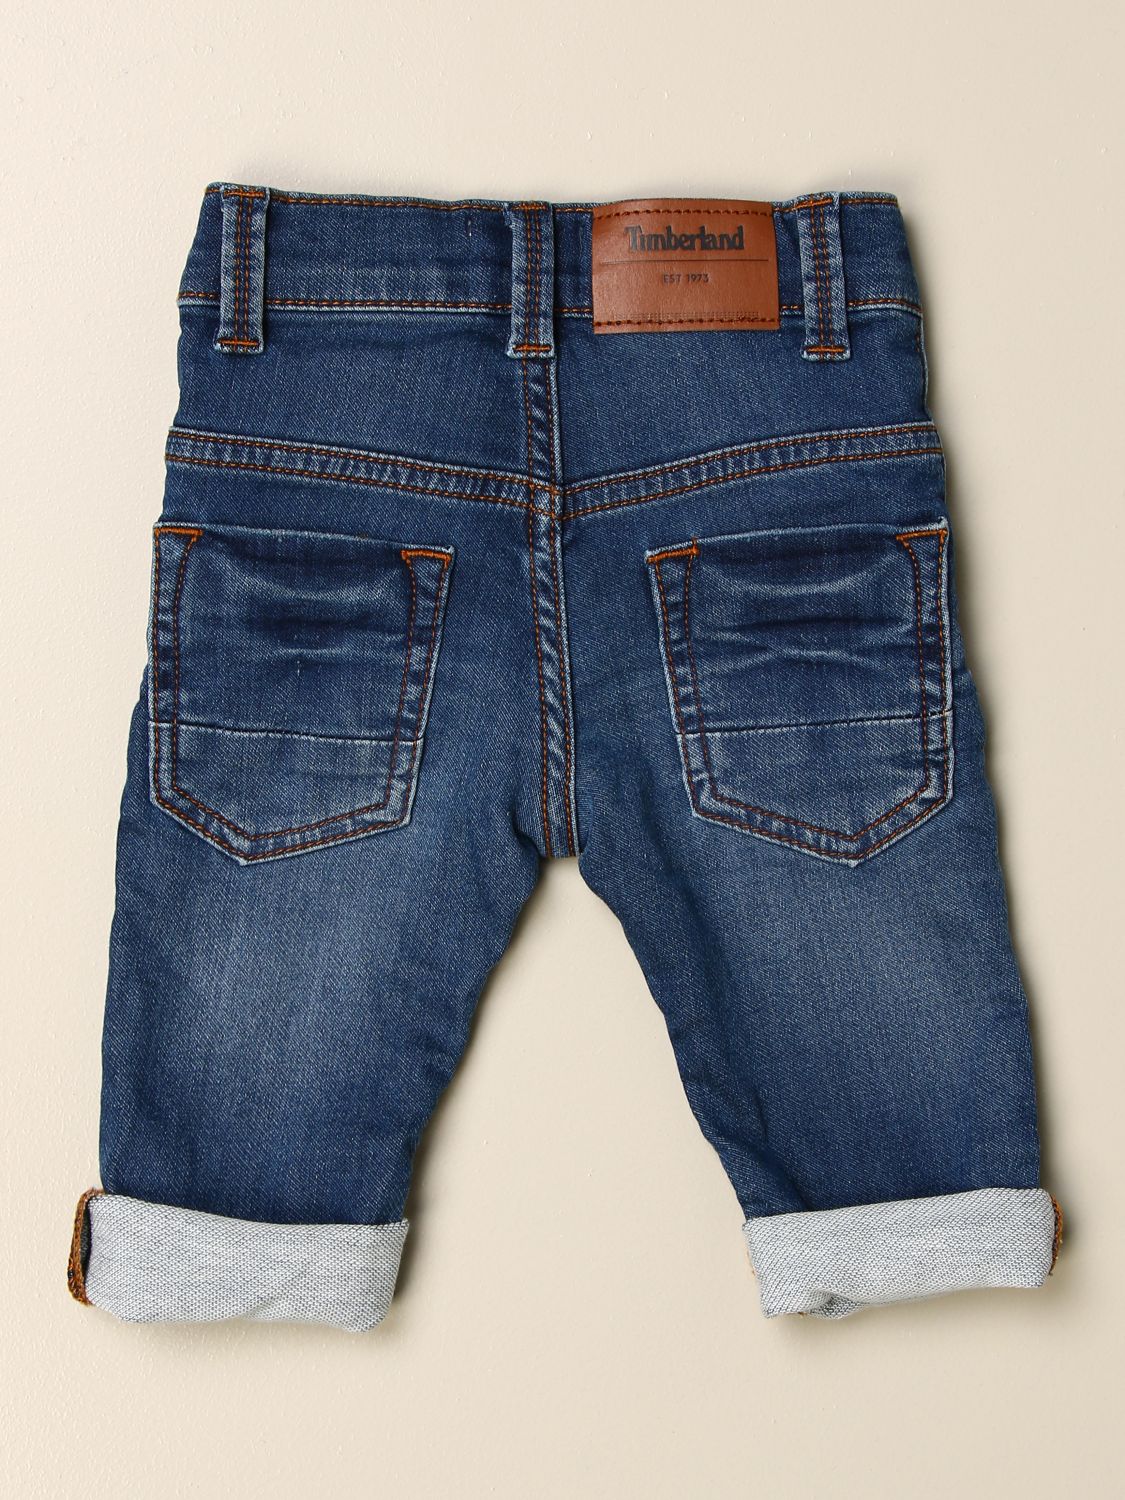 timberland jeans